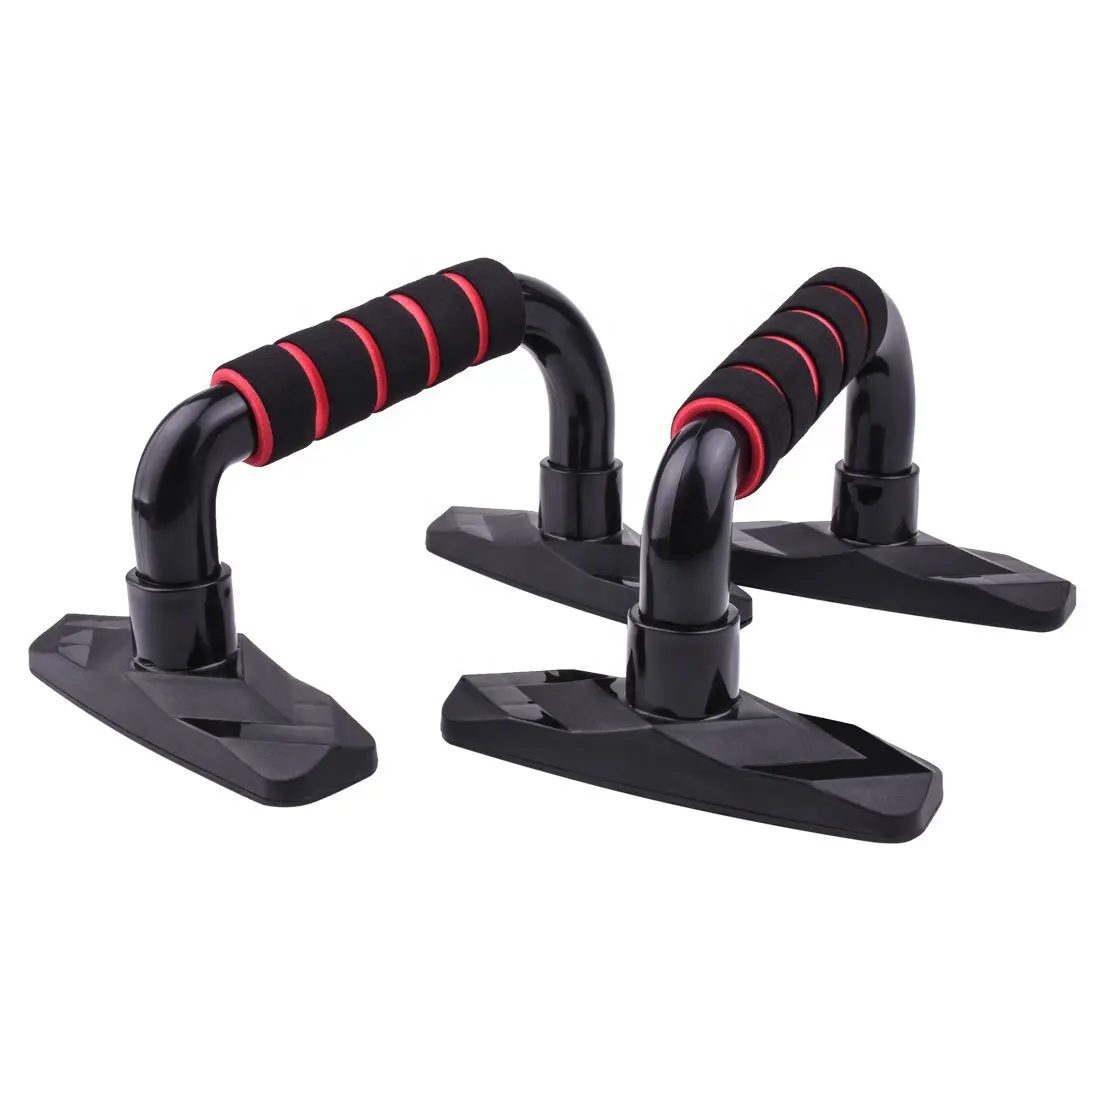 NEW I-shaped PVC push up bar for muscle and body training Home Exercise Push